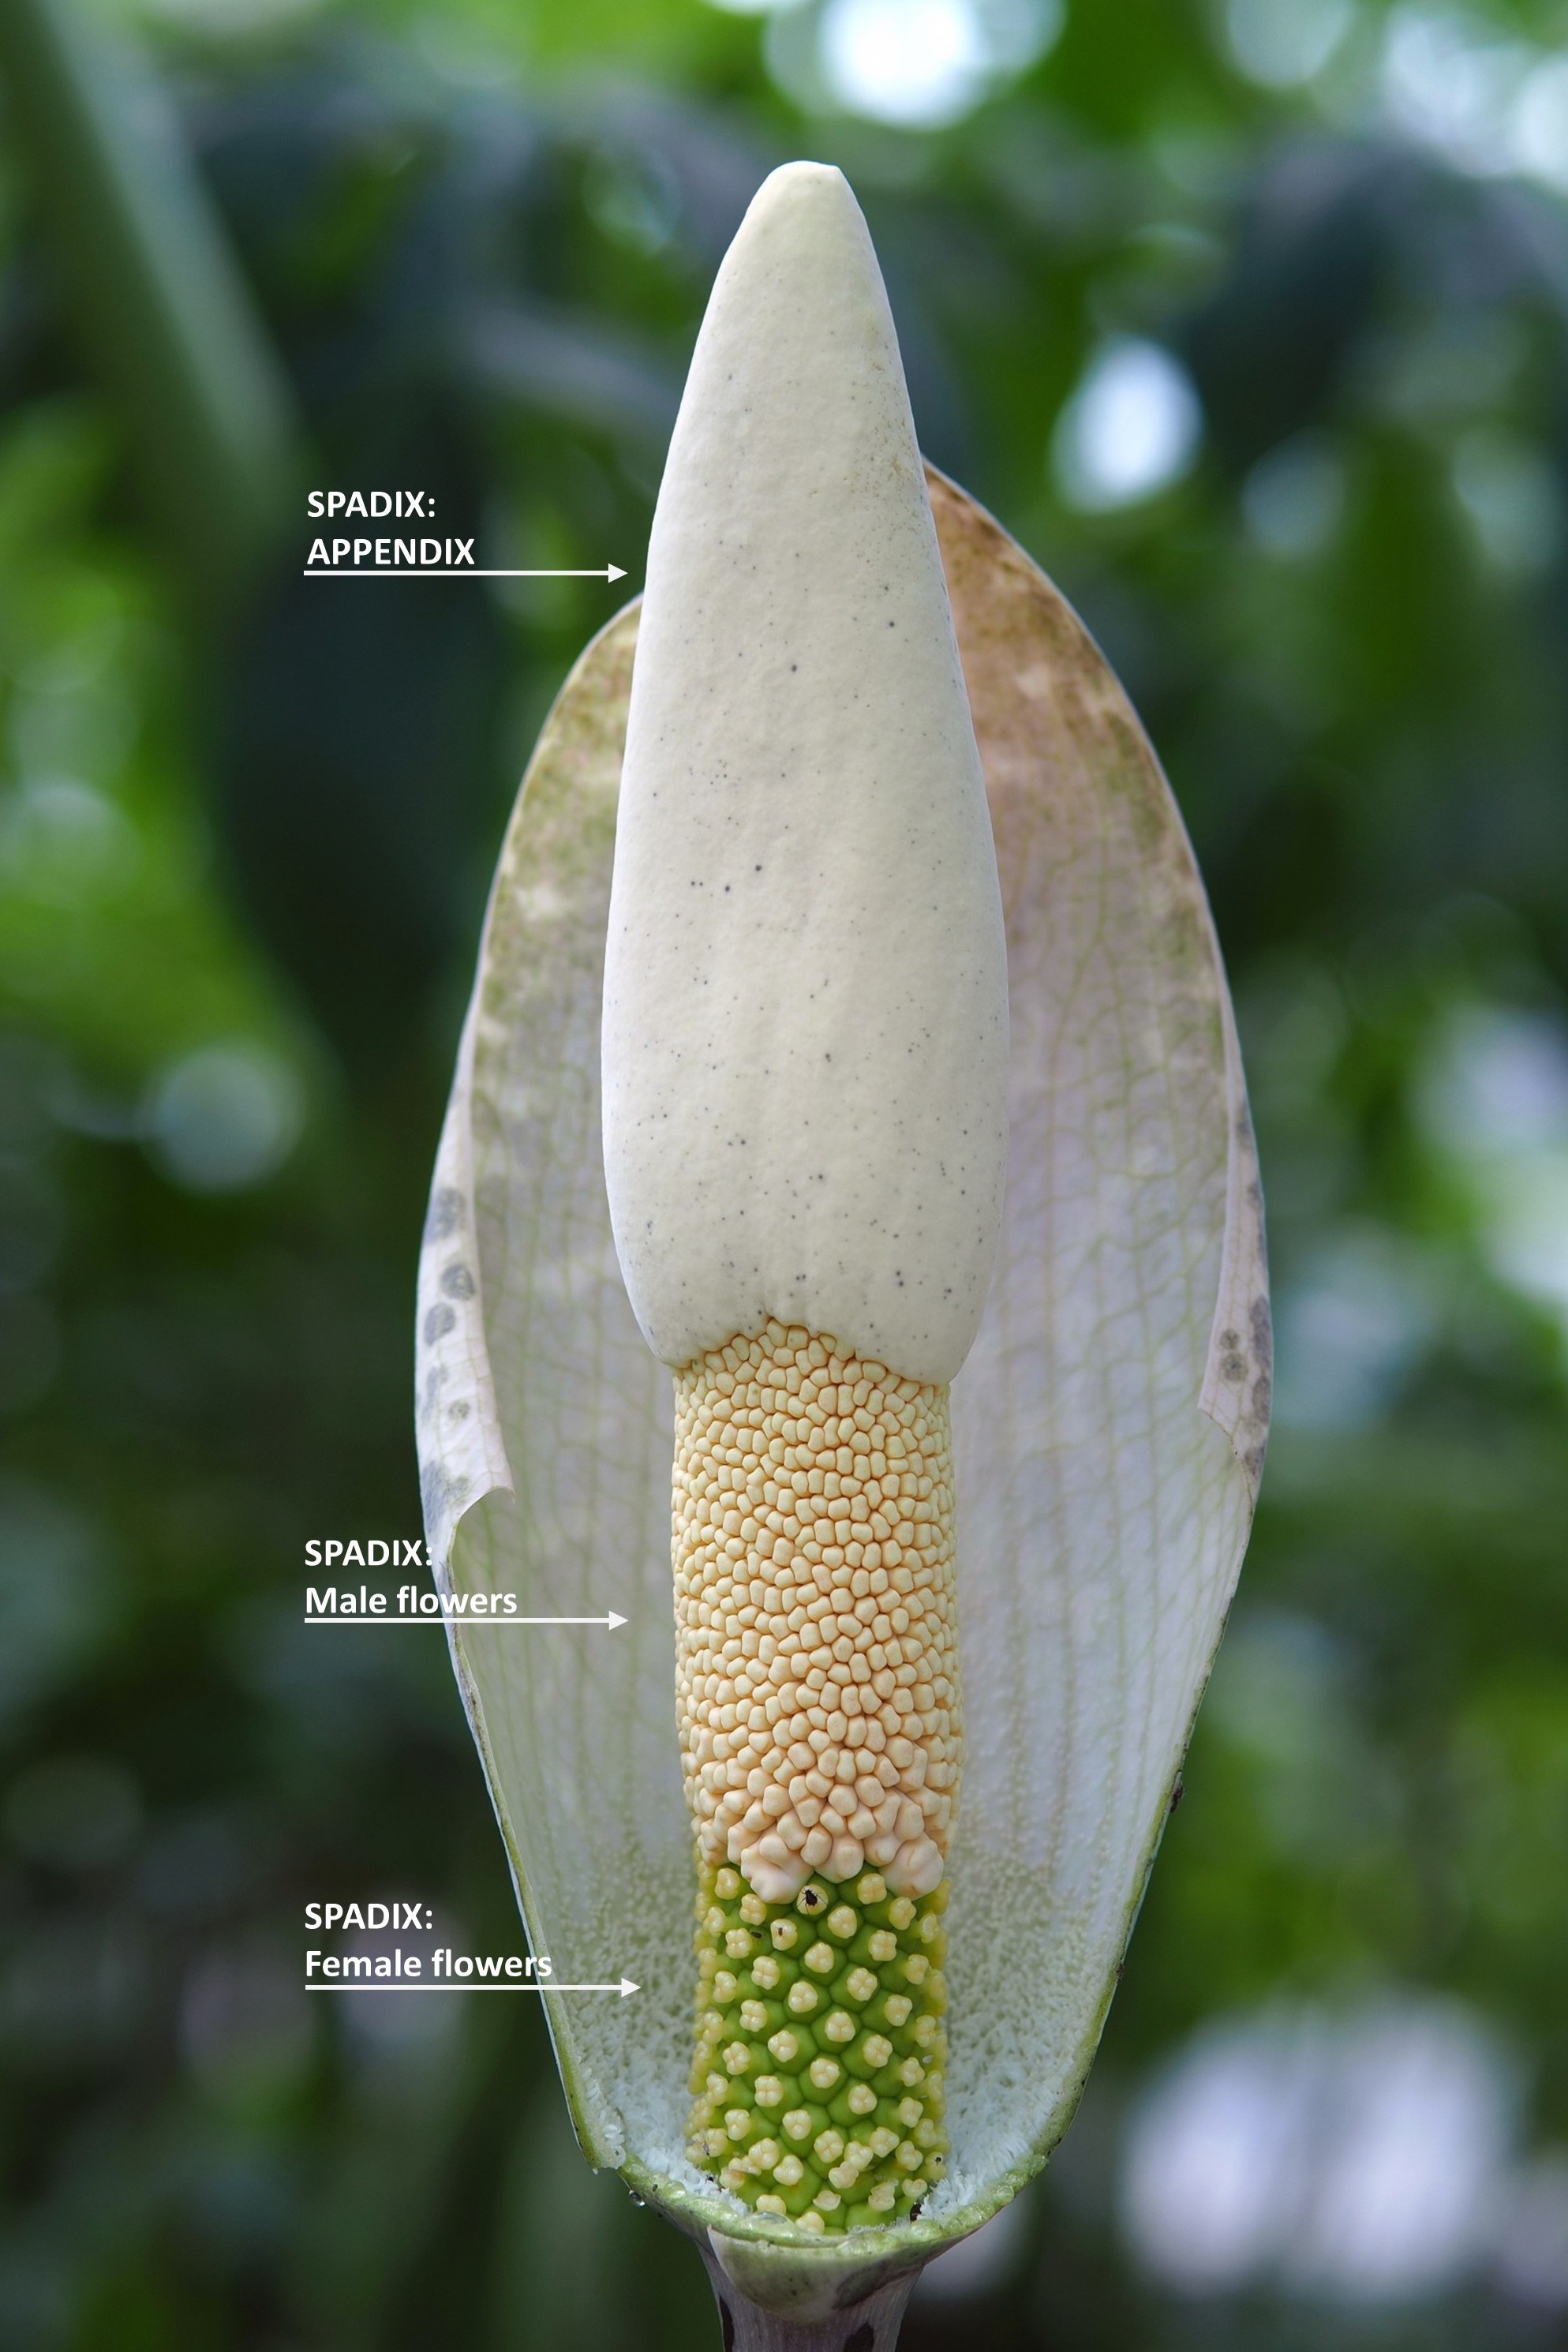 A large influorescence shows a phallus like structure the spadix. It is a cylindrical object with a three sections - male flowers, female flowers, and scent emitting appendix